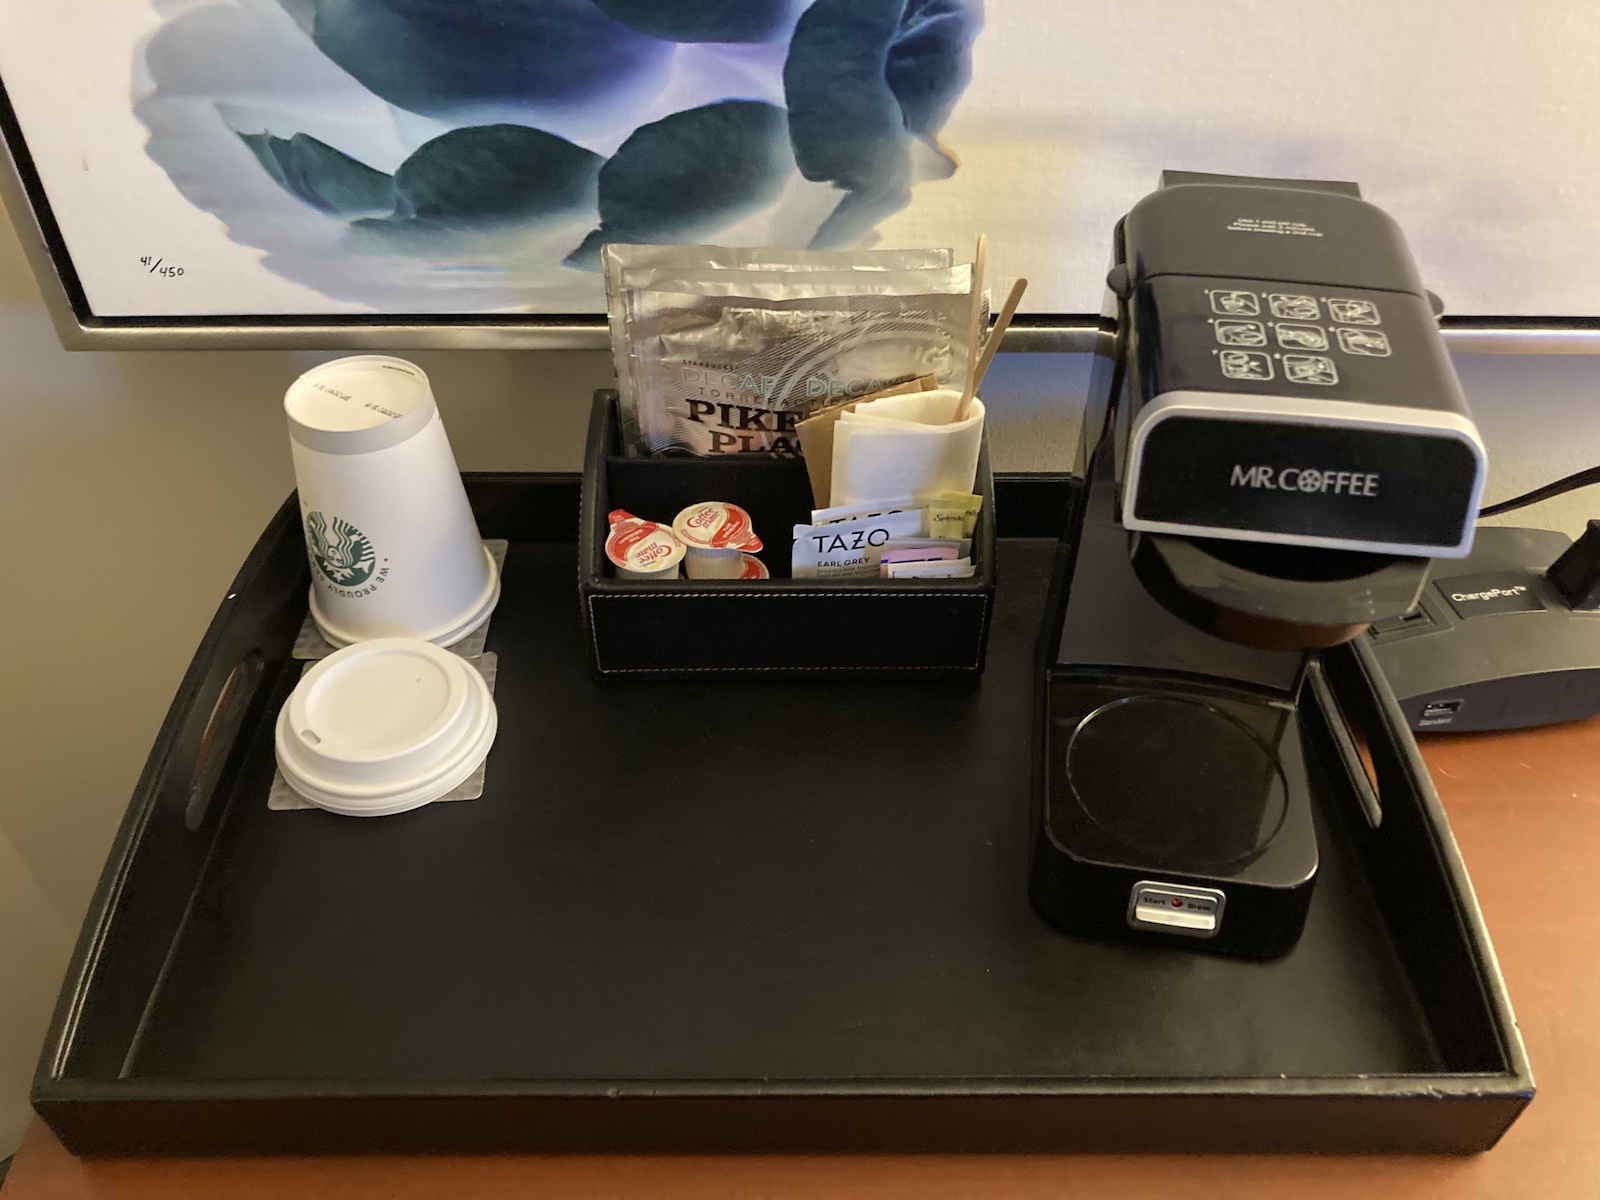 Coffee supplies and a coffee maker sit on the desk